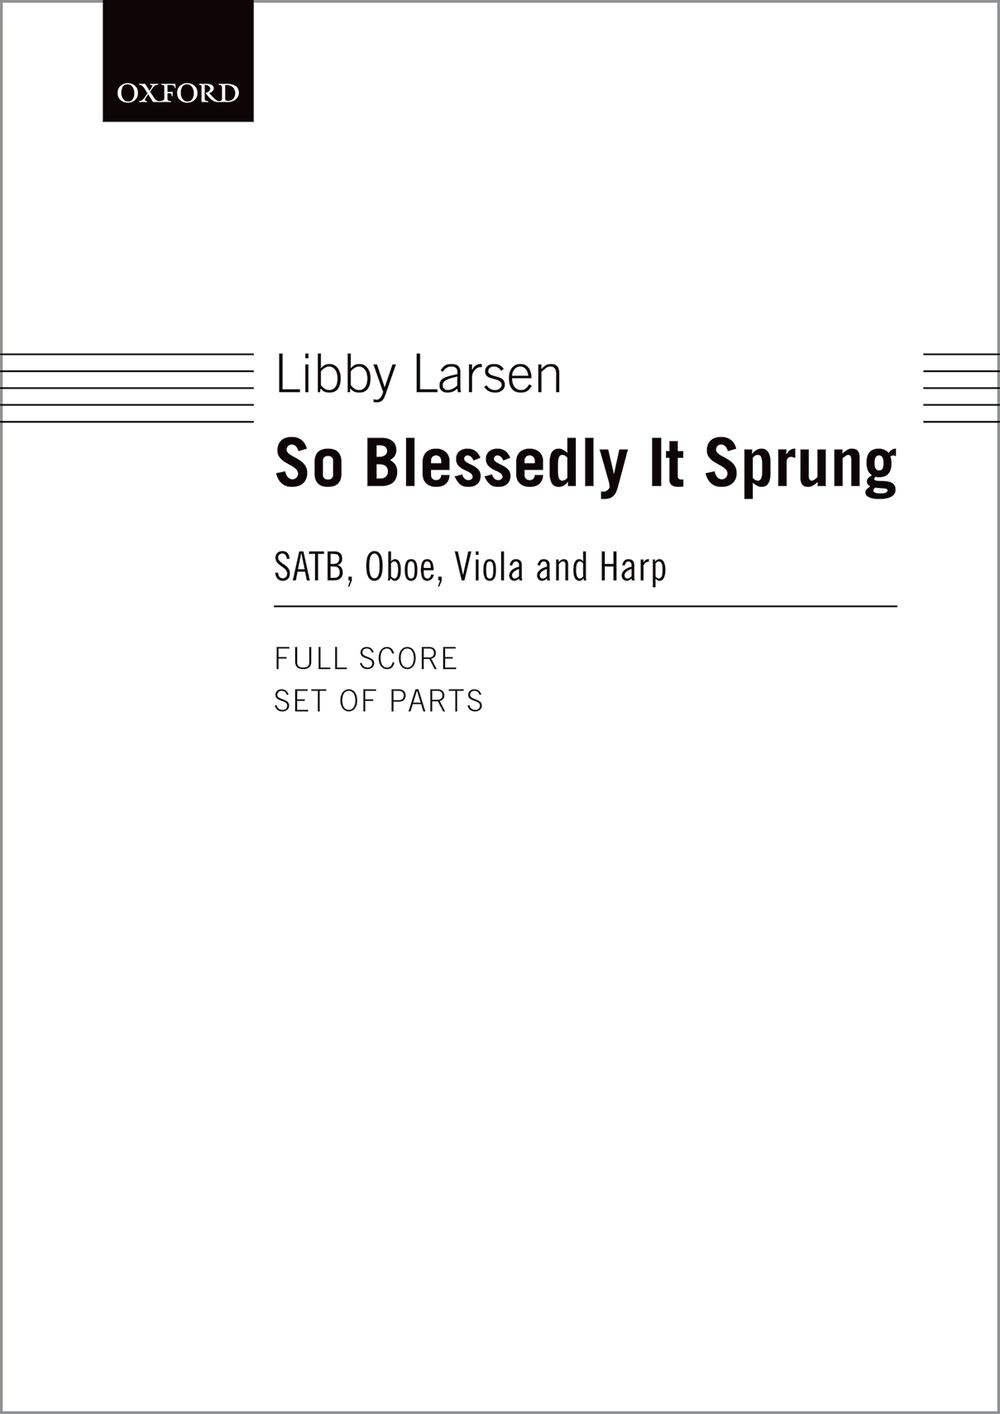 Libby Larsen: So Blessedly It Sprung: Mixed Choir: Score and Parts